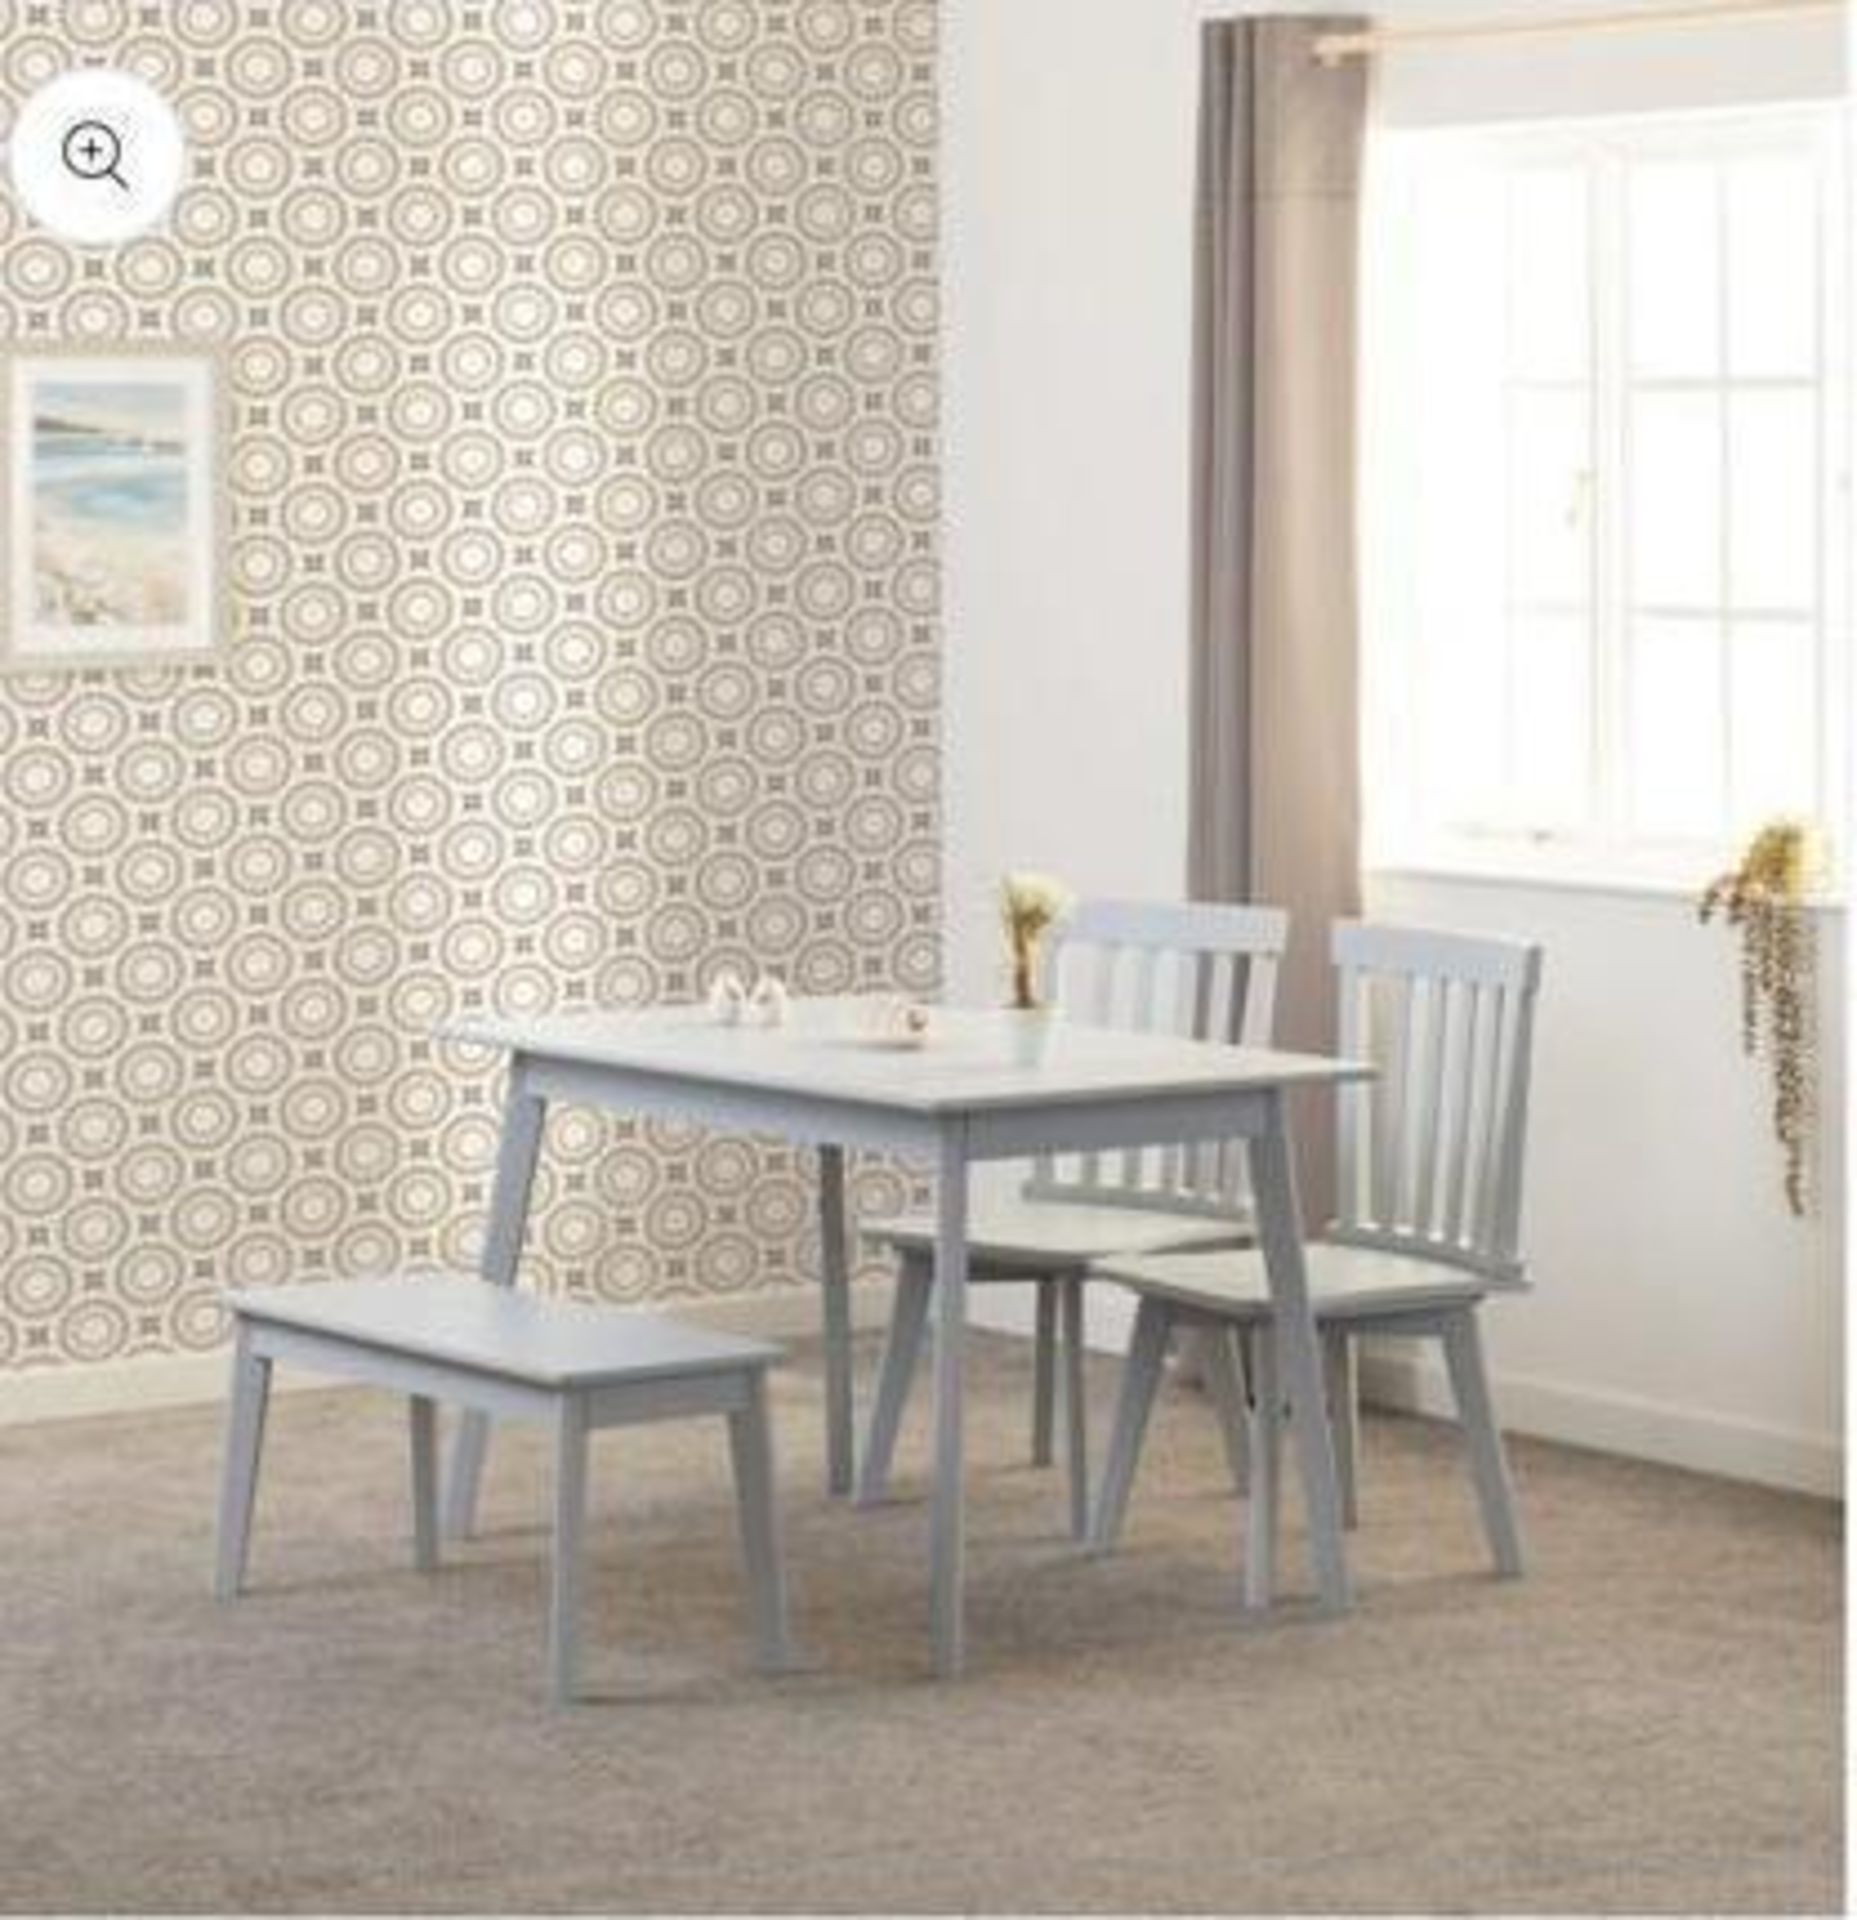 *EX DISPLAY* Matlock grey wooden 4 seater dining set with bench. RRP: £279.99.00